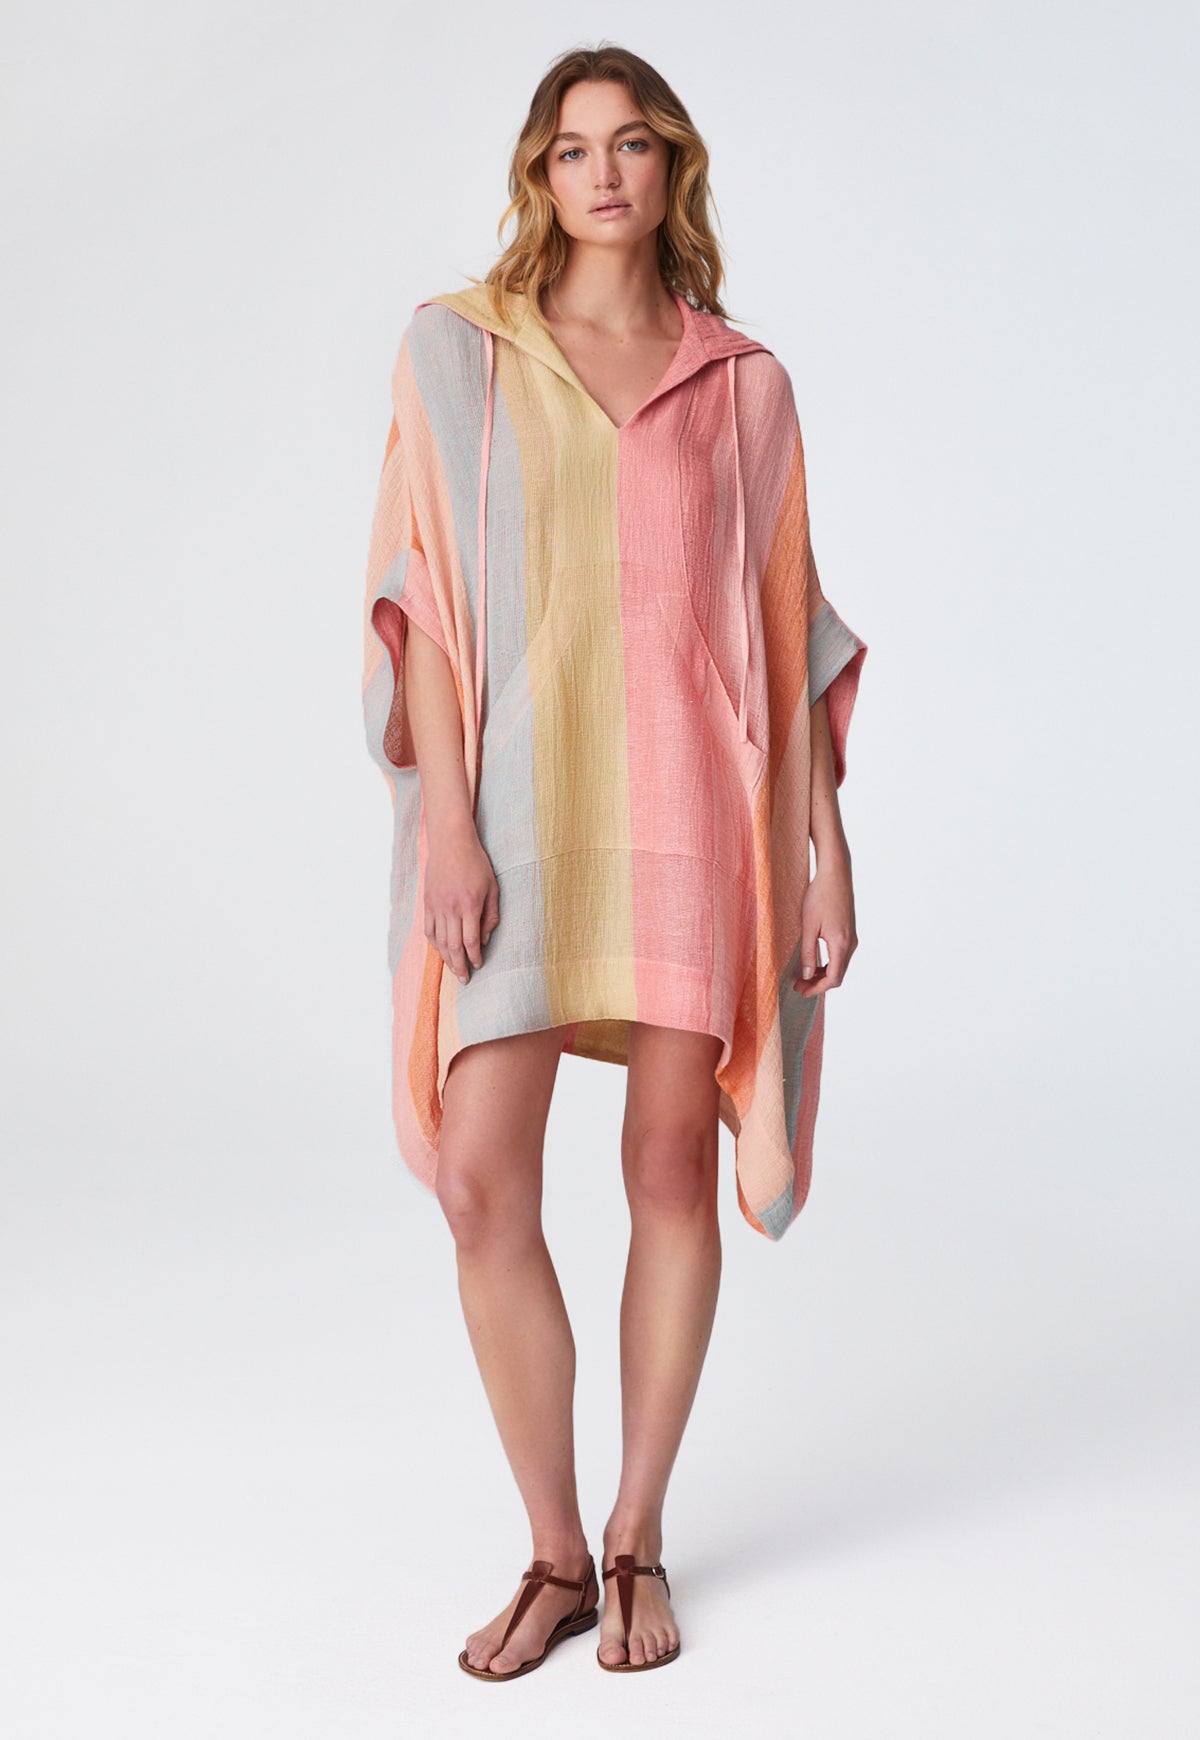 THE HOODED PONCHO in SHERBET AWNING STRIPED GAUZE